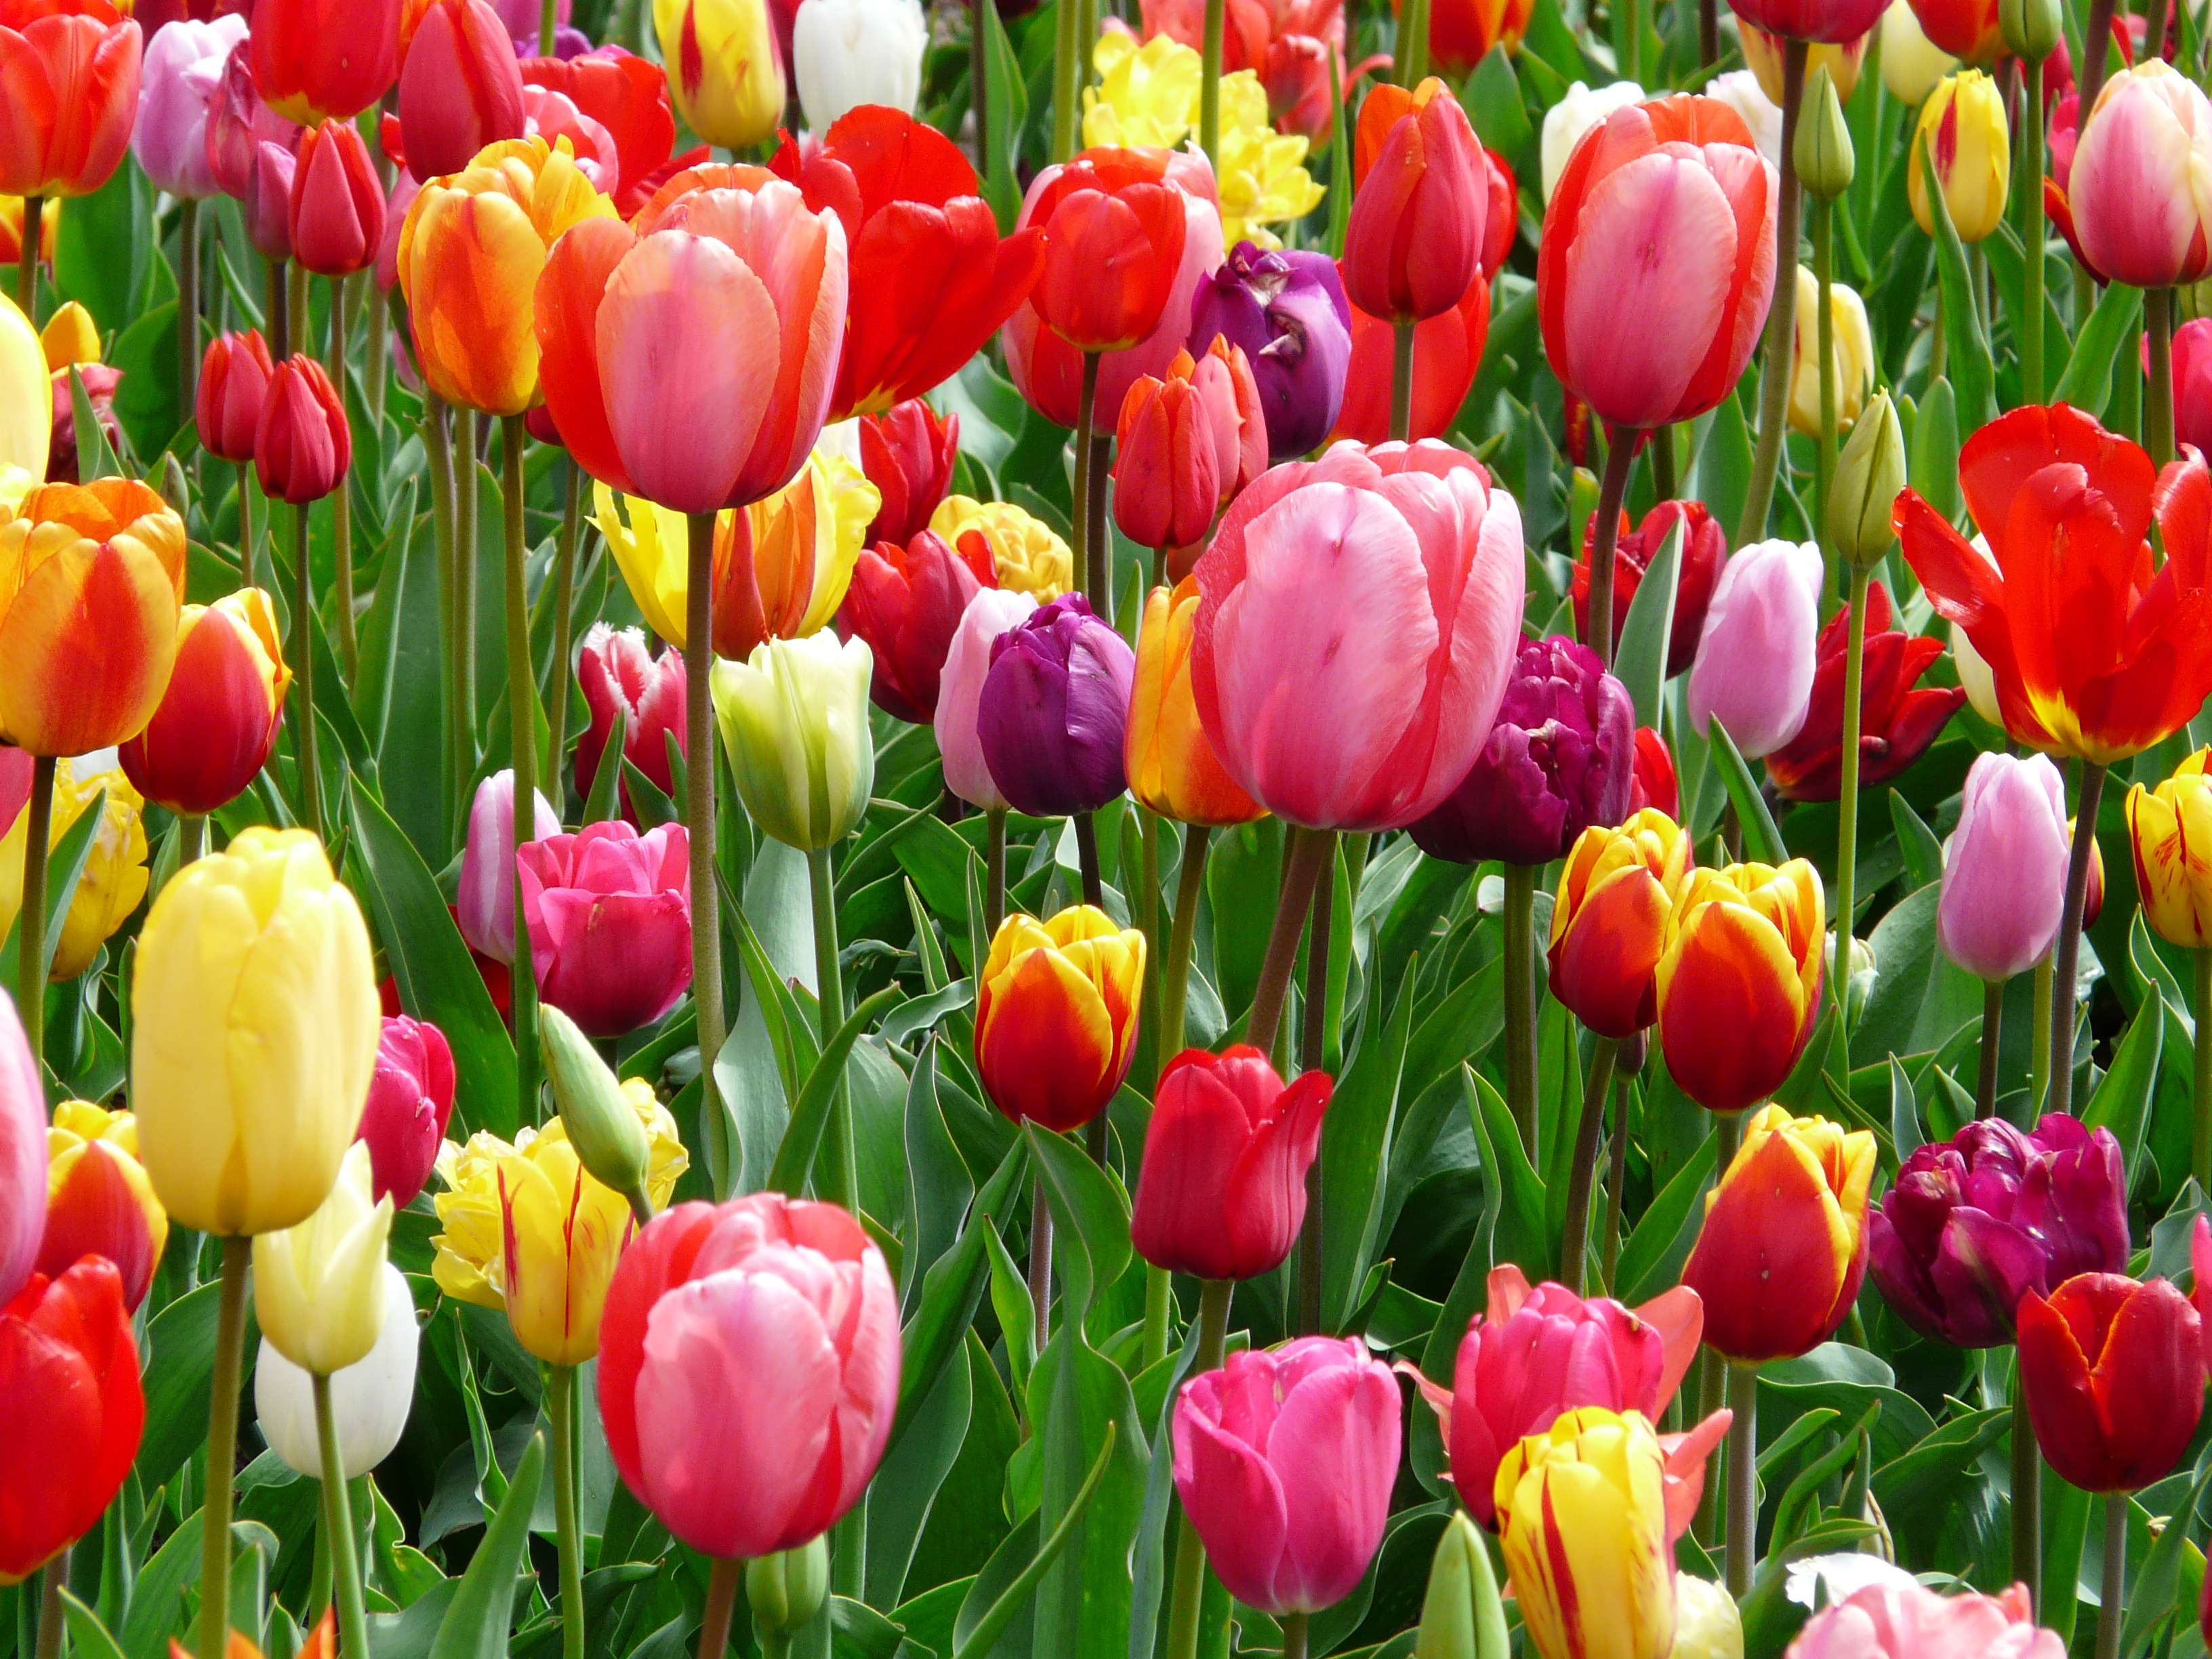 A field of colored tulips